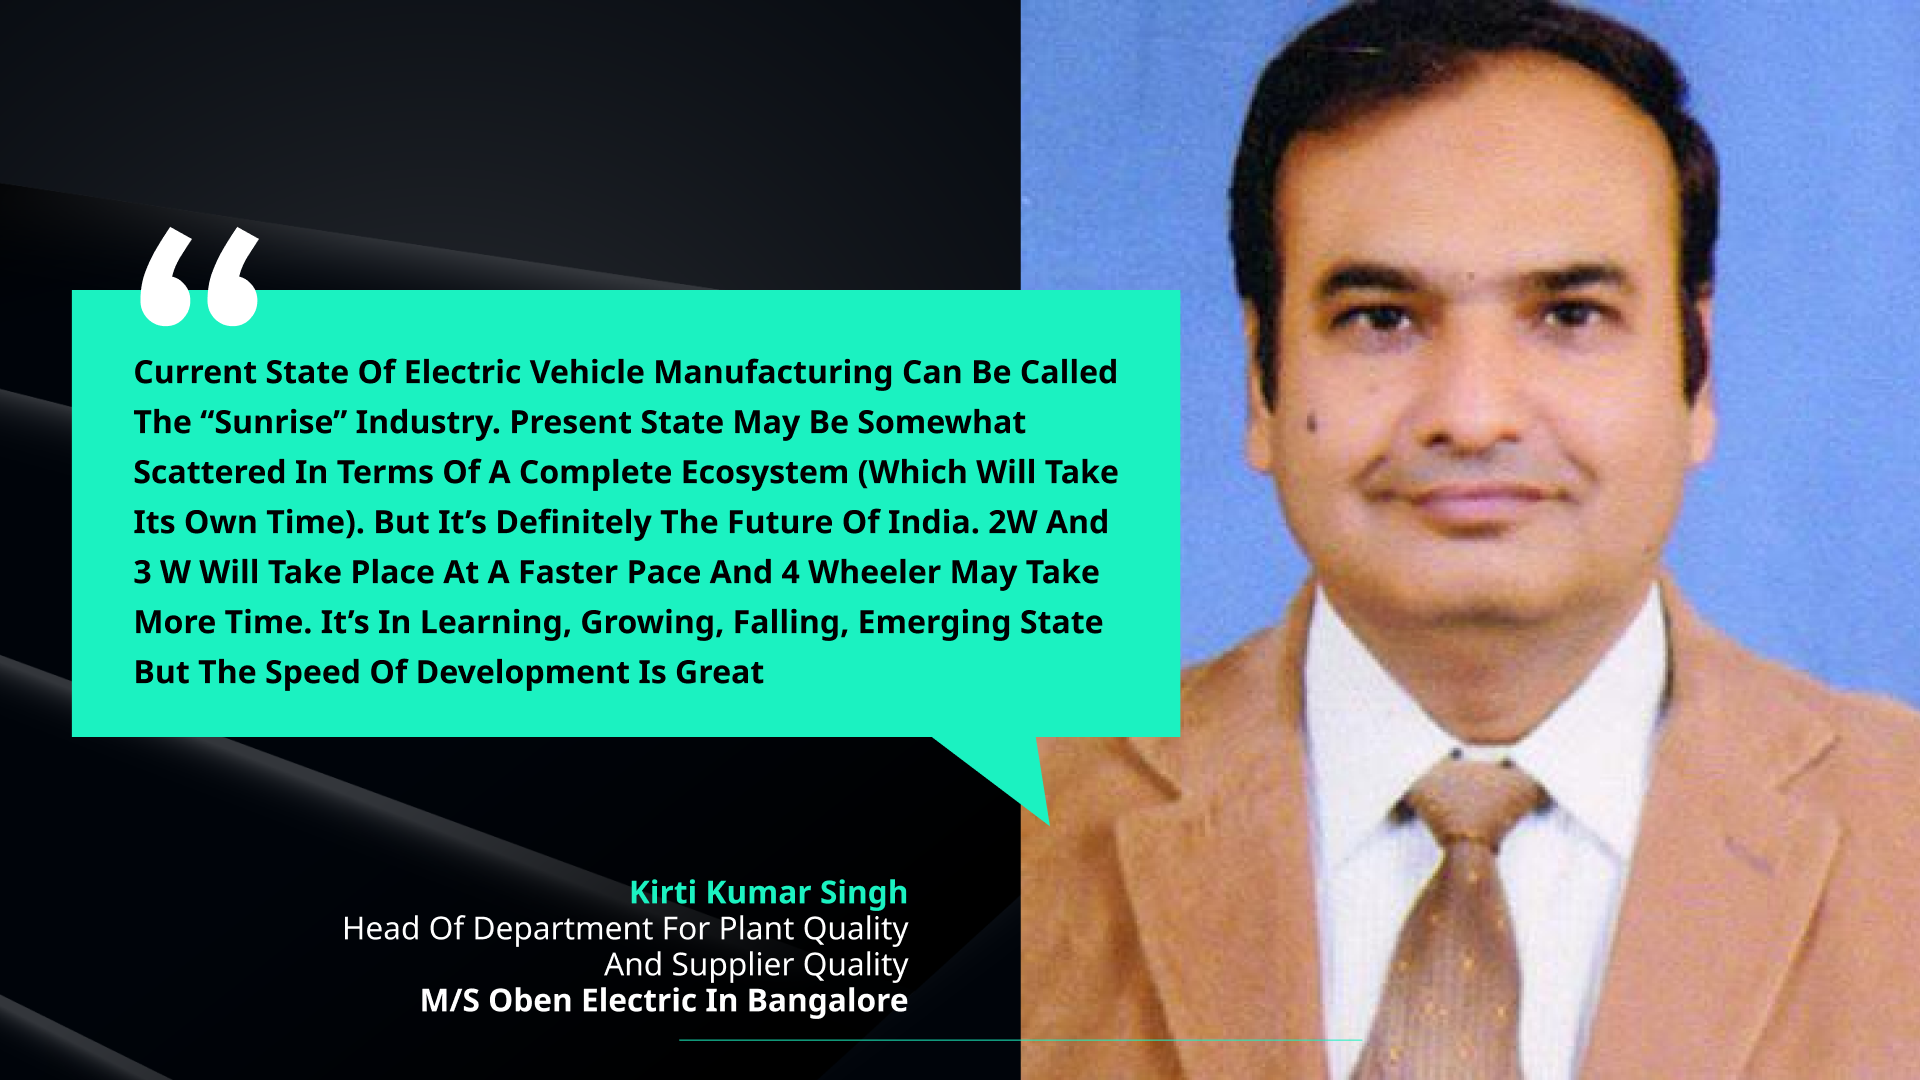 Insightful Q&A Session With Kirti Kumar Singh, Head of Department For Plant Quality And Supplier Quality At M/s Oben Electric In Bangalore.